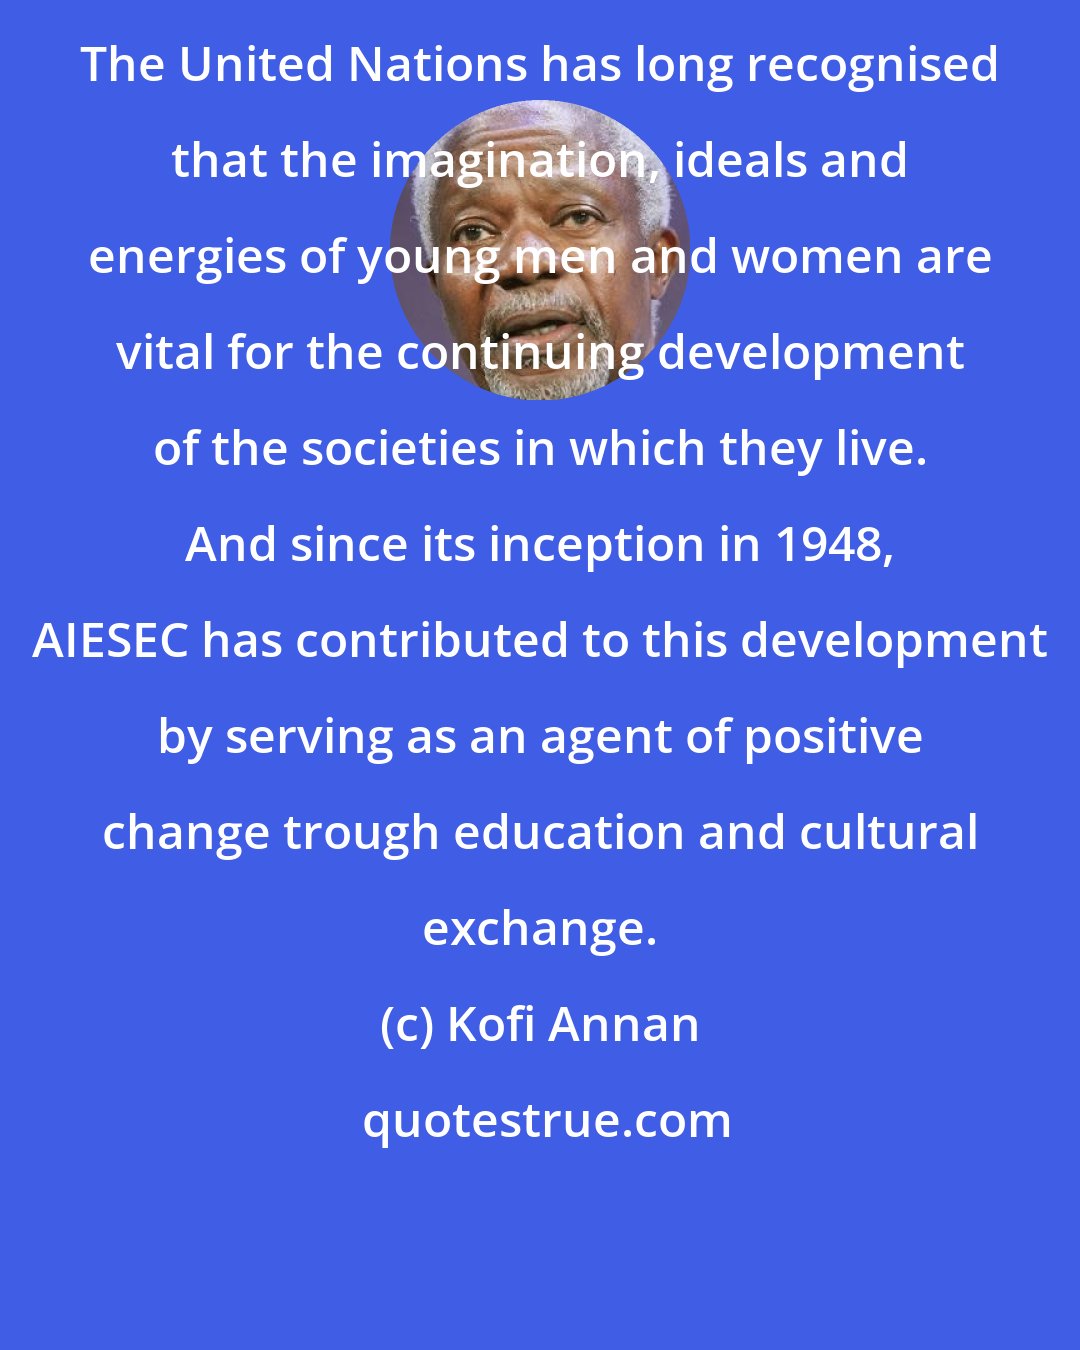 Kofi Annan: The United Nations has long recognised that the imagination, ideals and energies of young men and women are vital for the continuing development of the societies in which they live. And since its inception in 1948, AIESEC has contributed to this development by serving as an agent of positive change trough education and cultural exchange.